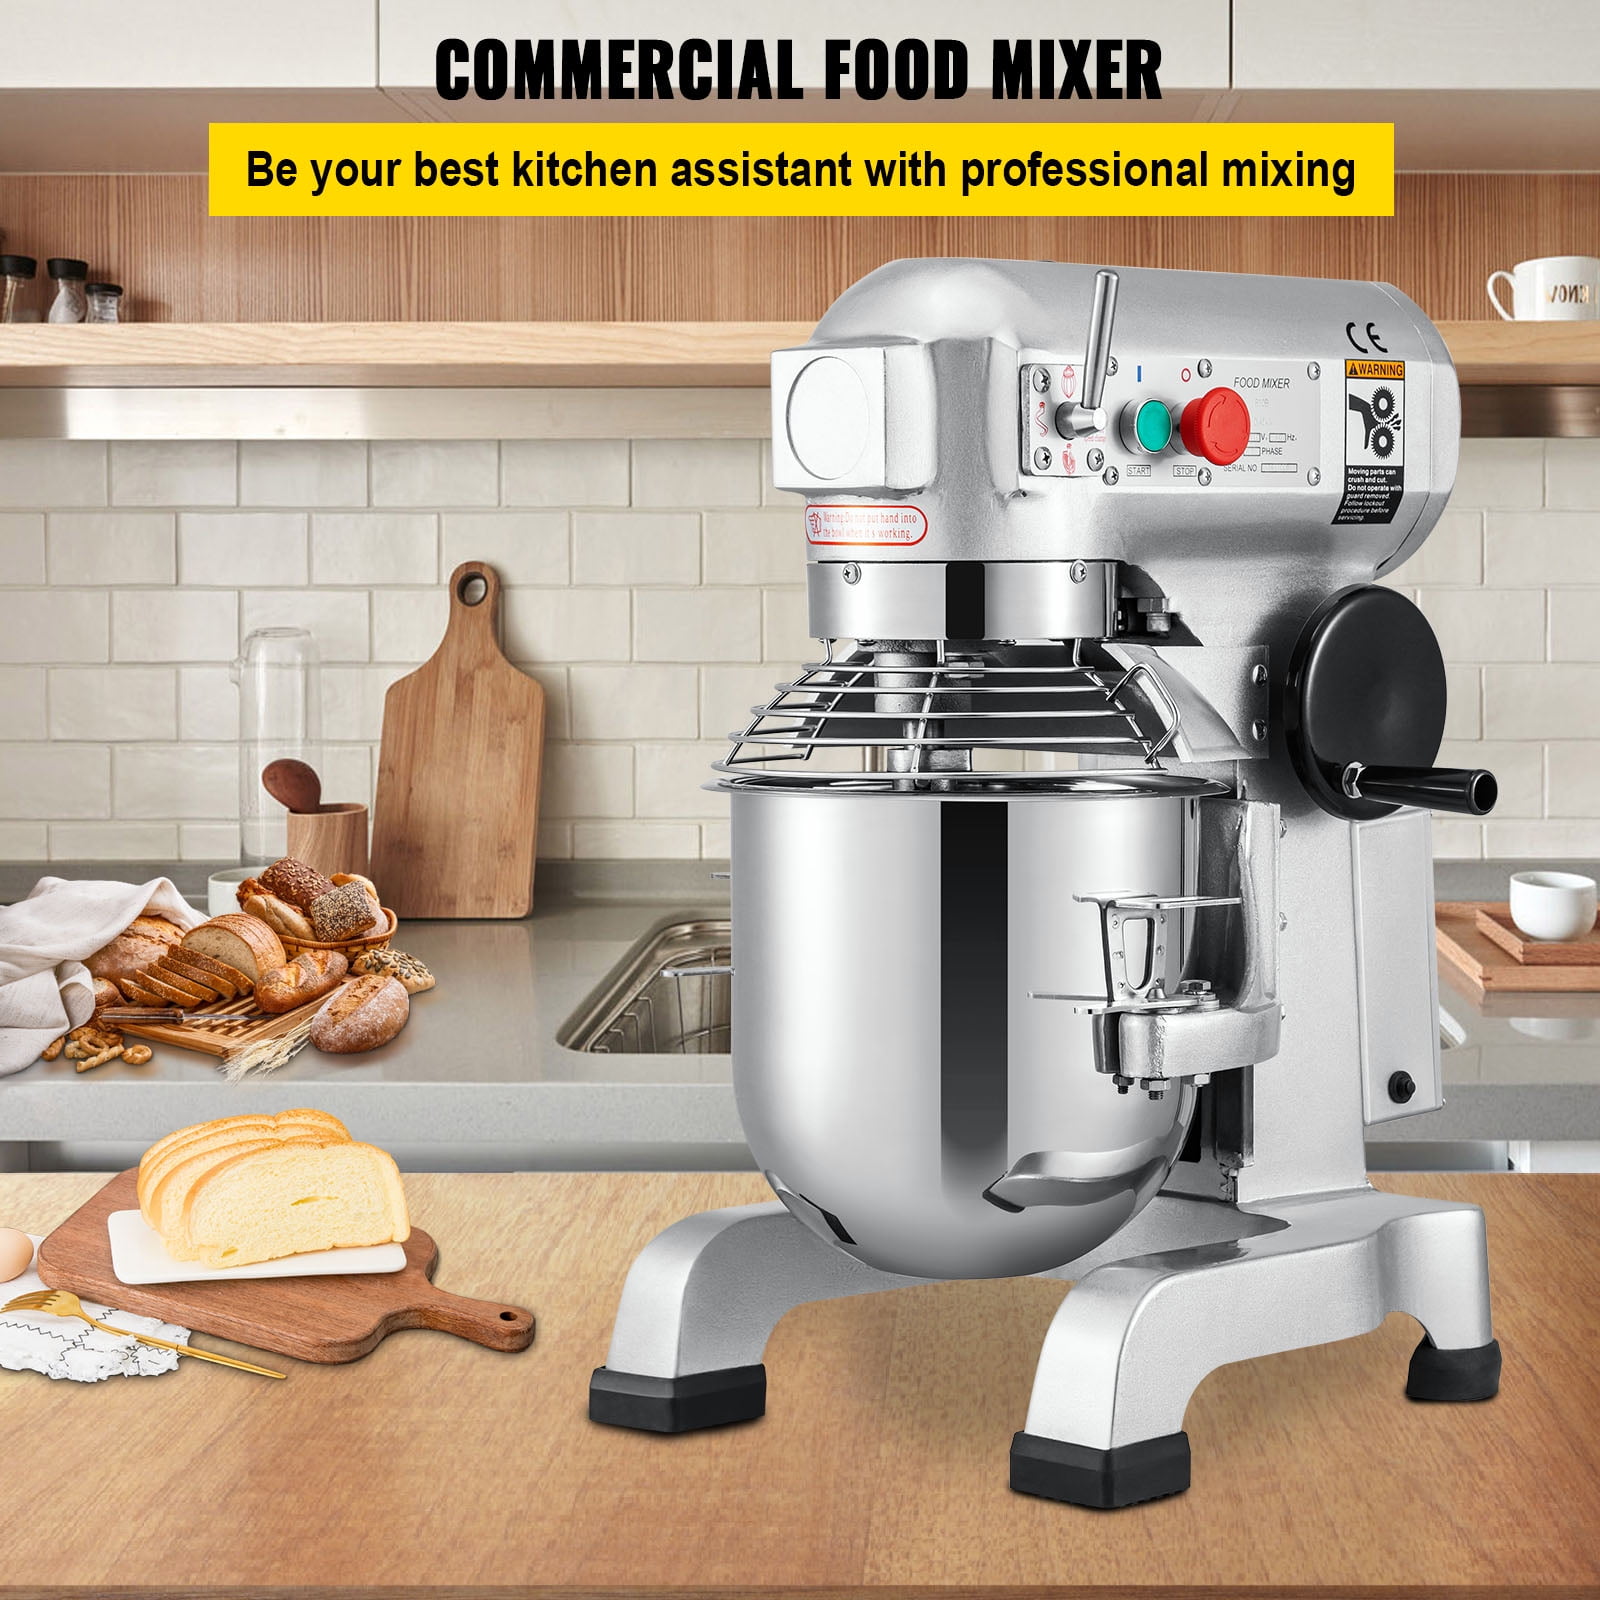 Commercial Mixers by KitchenAid, Berkel, Doyon, Dynamic, Globe, Vollrath,  Univex, and more